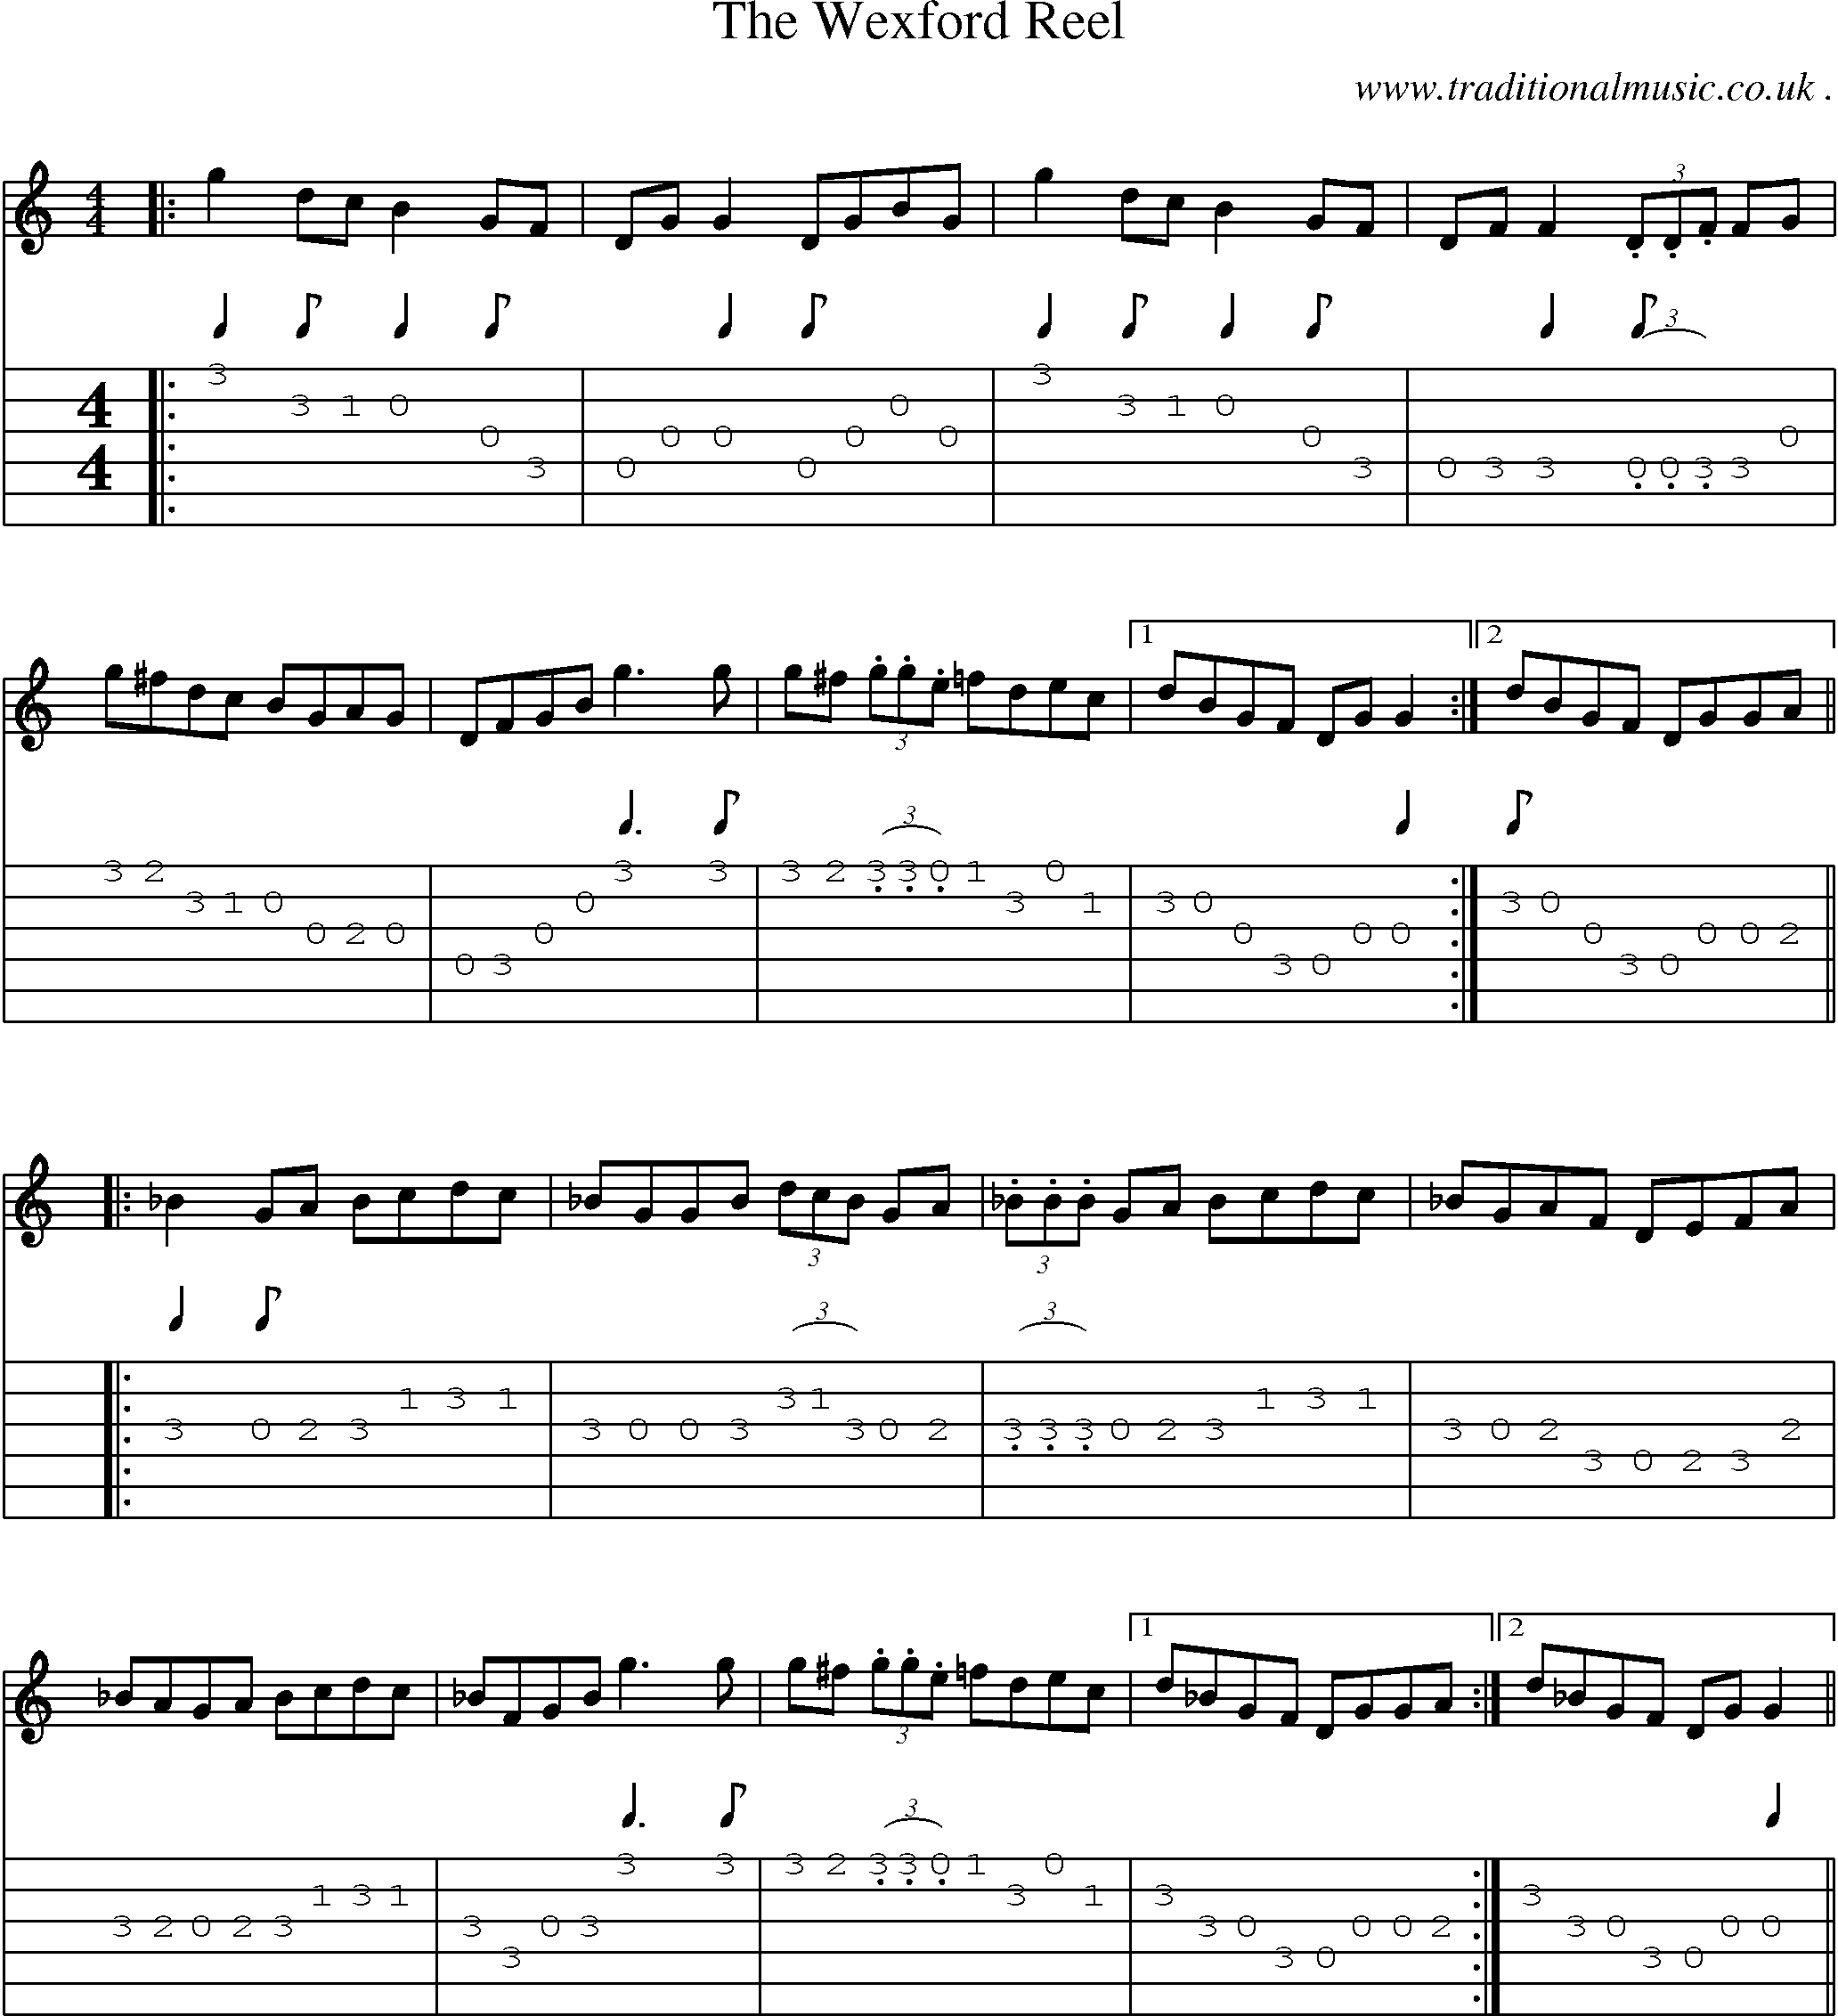 Sheet-Music and Guitar Tabs for The Wexford Reel